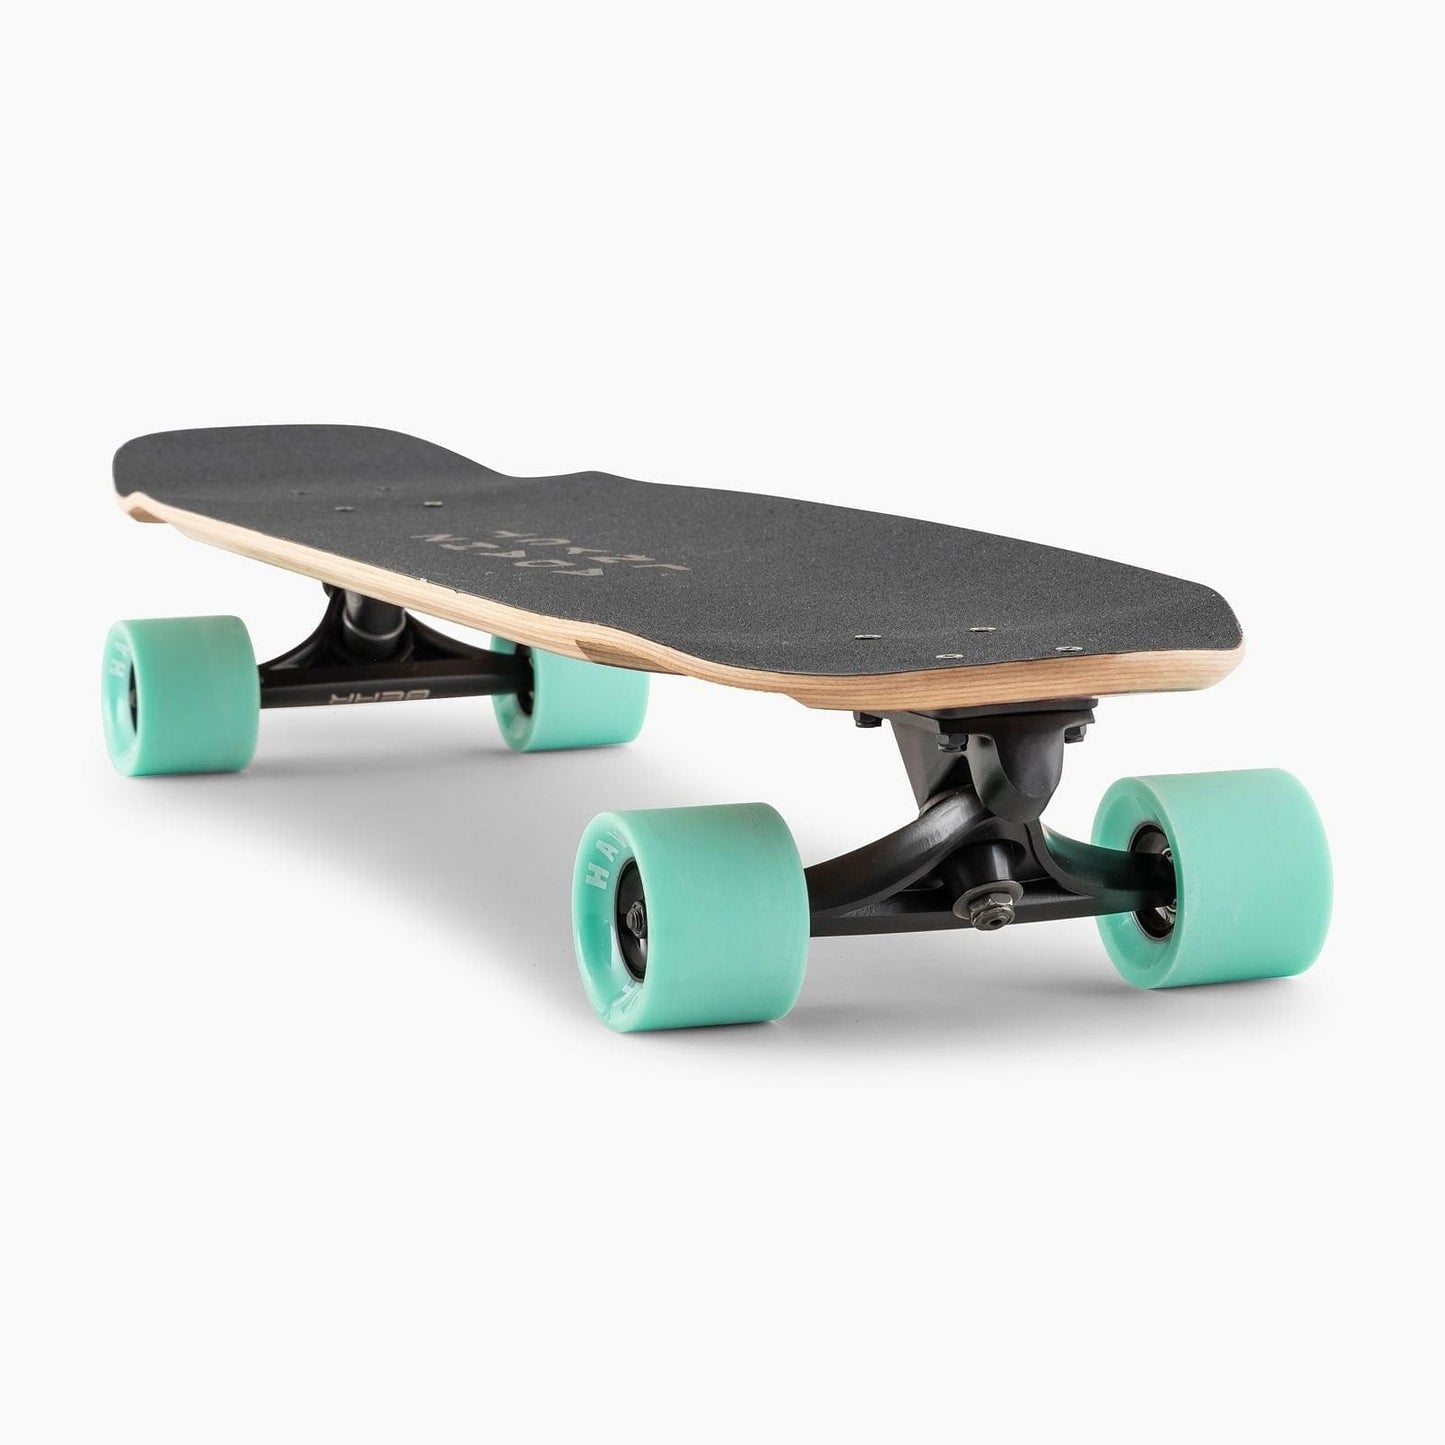 Landyachtz | Freedive Reef Complete (Wheels and Trucks May Vary)